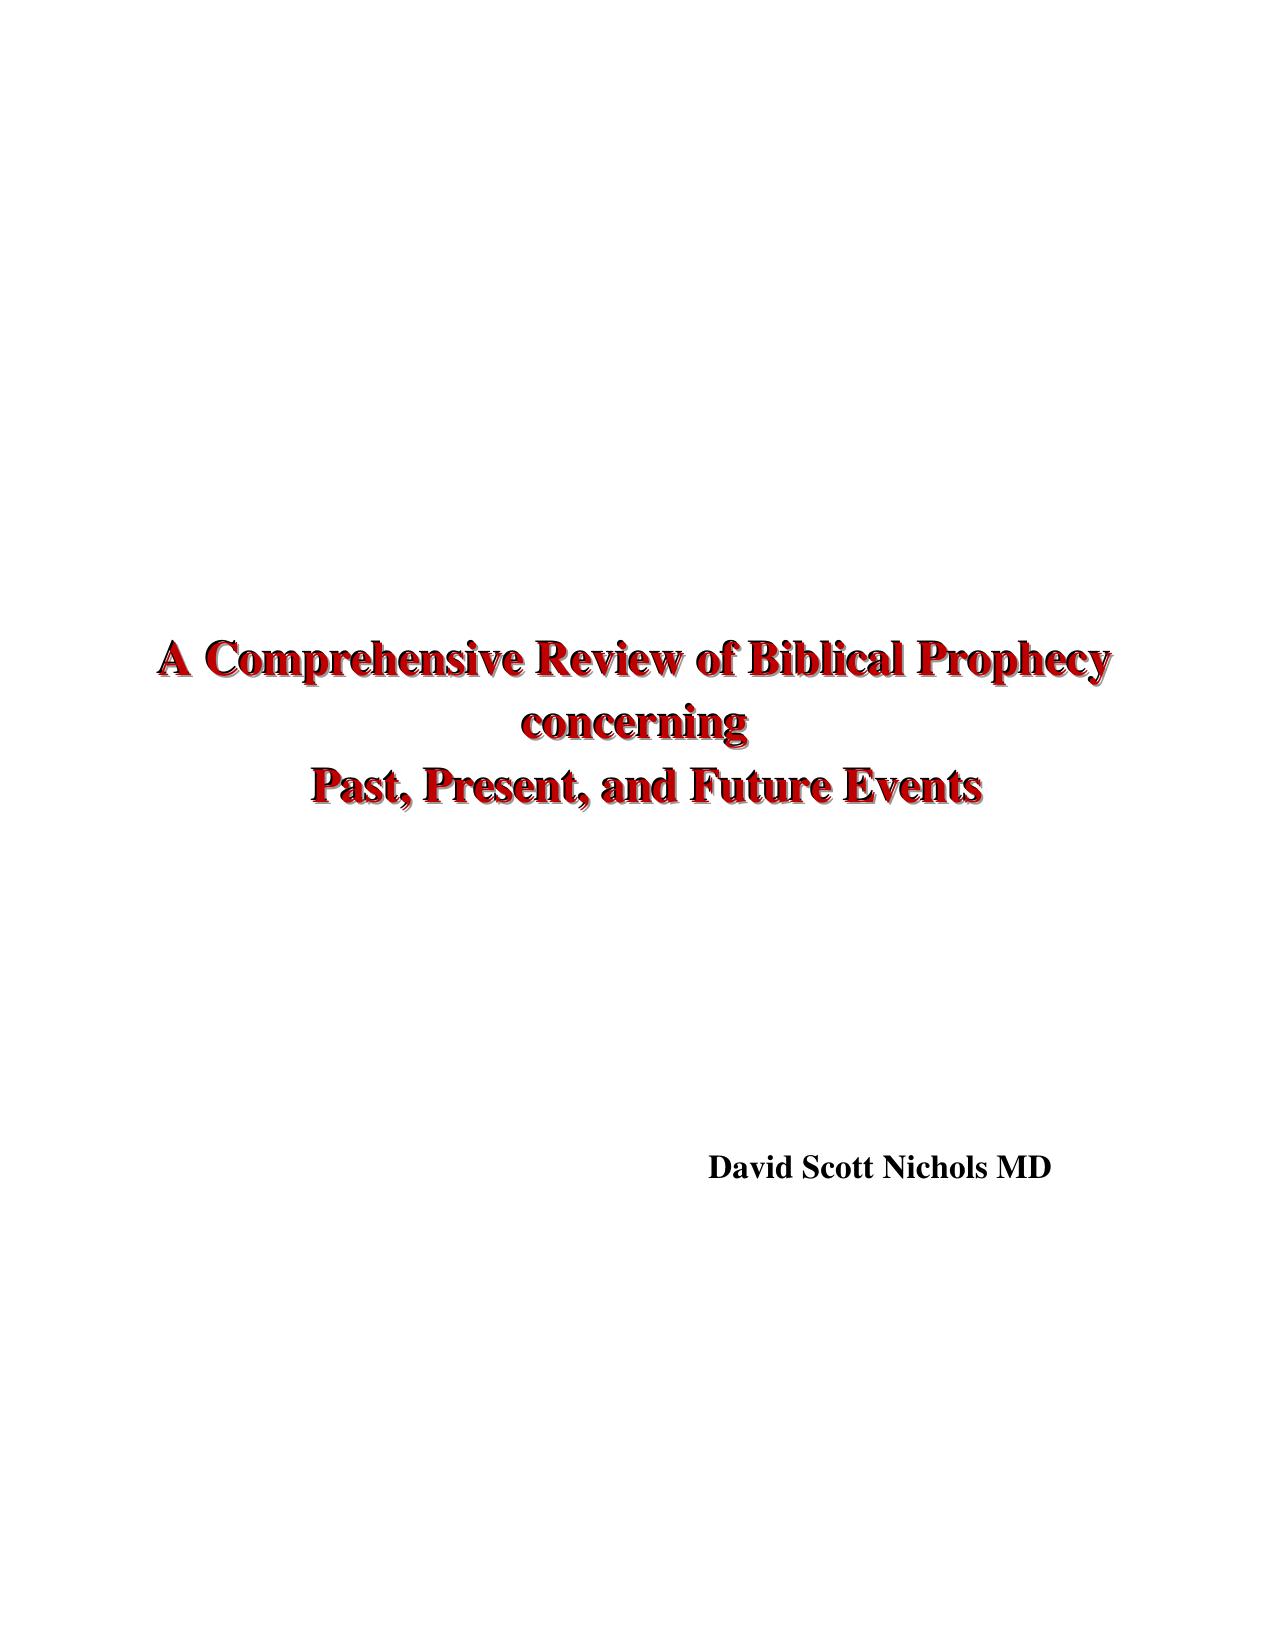 Eschatology – A Comprehensive Analysis of End-Time Prophecy